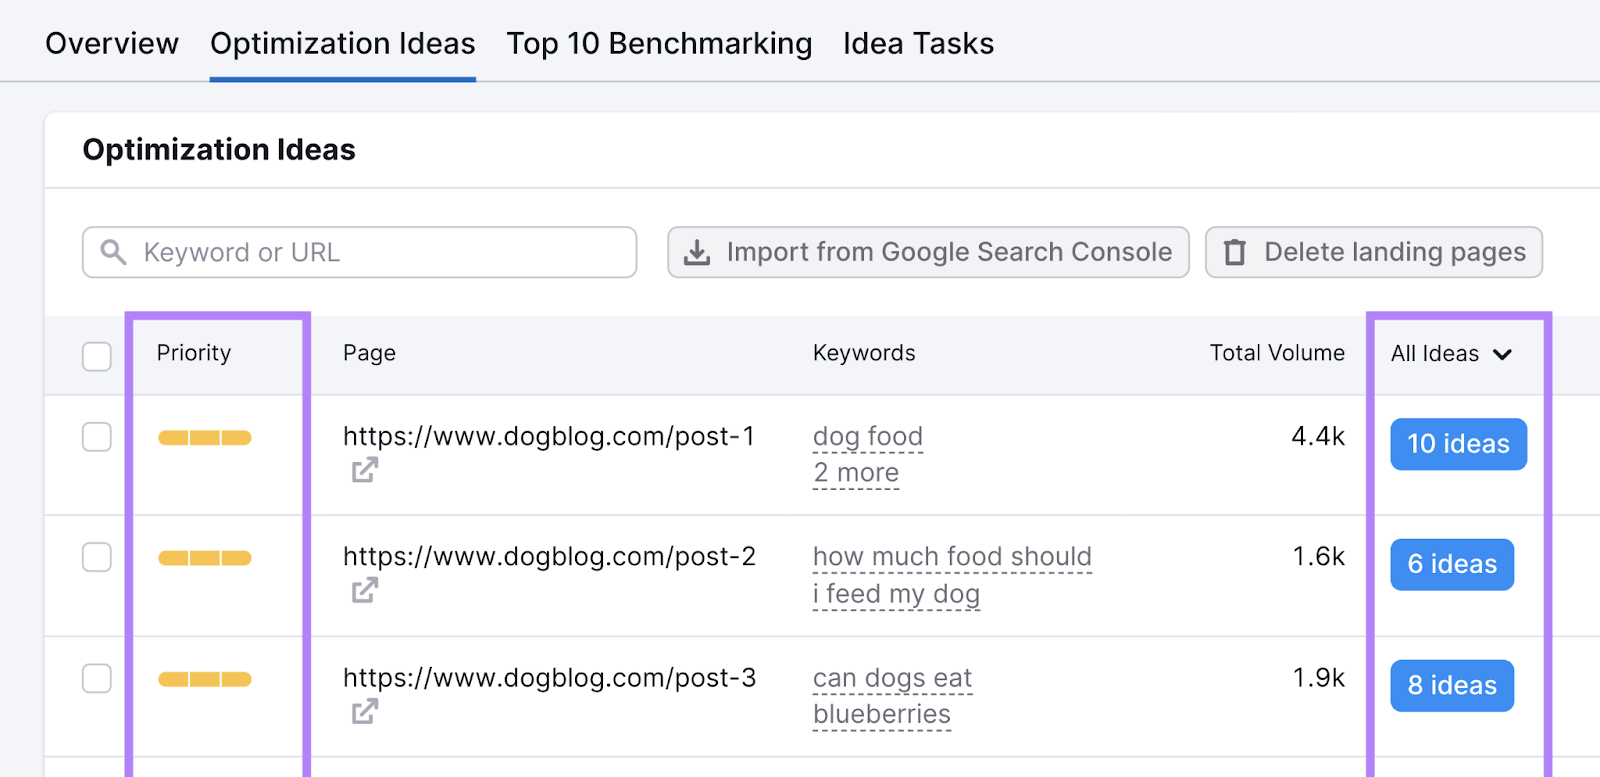 "Optimization Ideas" tab in On Page SEO Checker tool